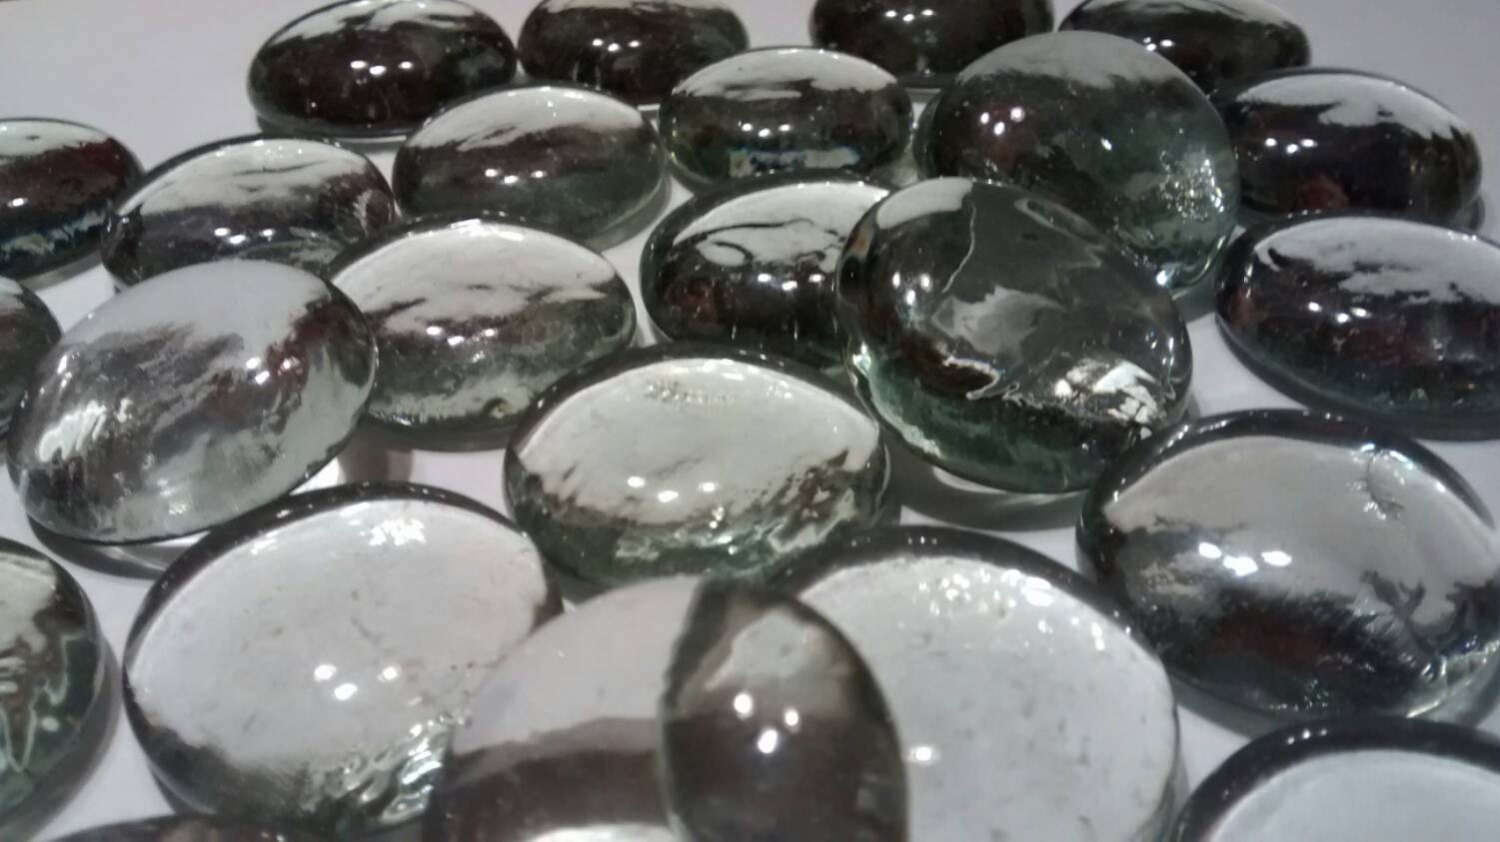 50 Large Glass Clear Gemsflat Marbles Measure By Ckjsupplies